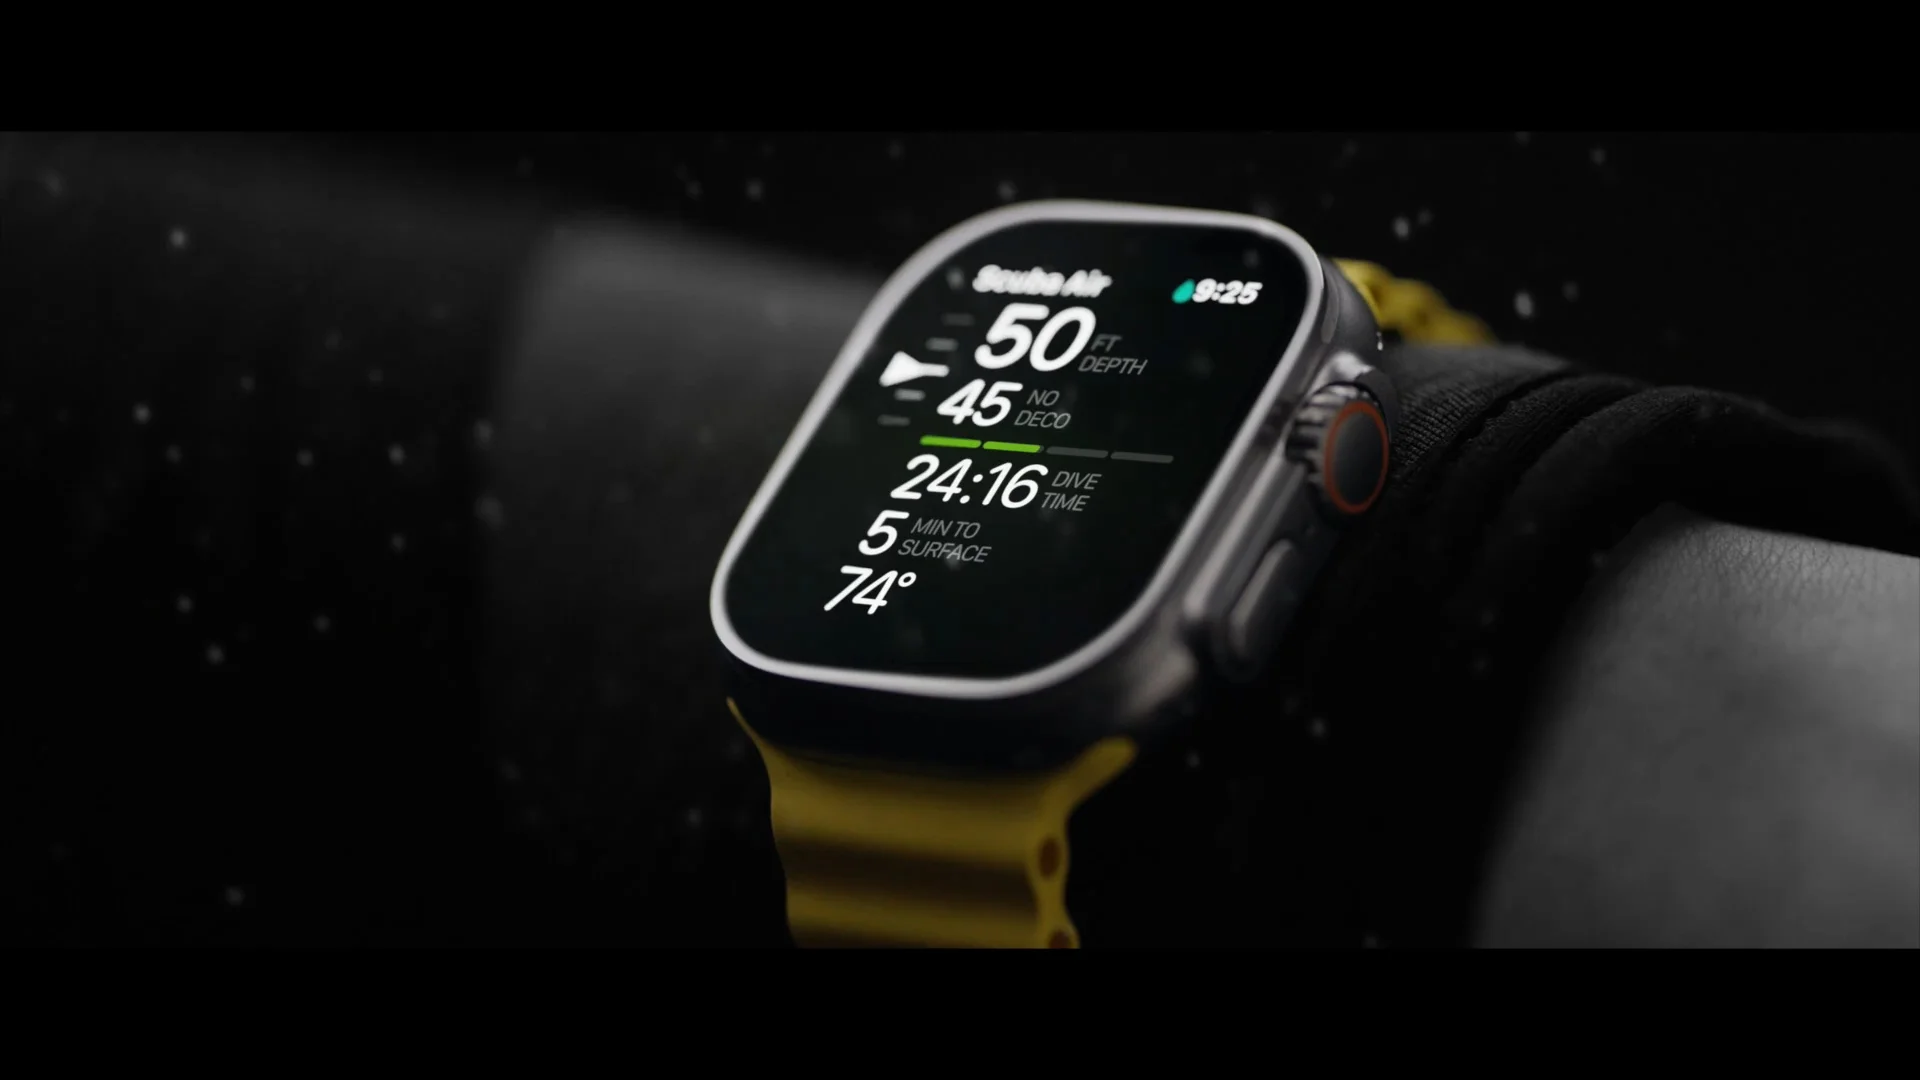 New Apple Watch Ultra features and specifications